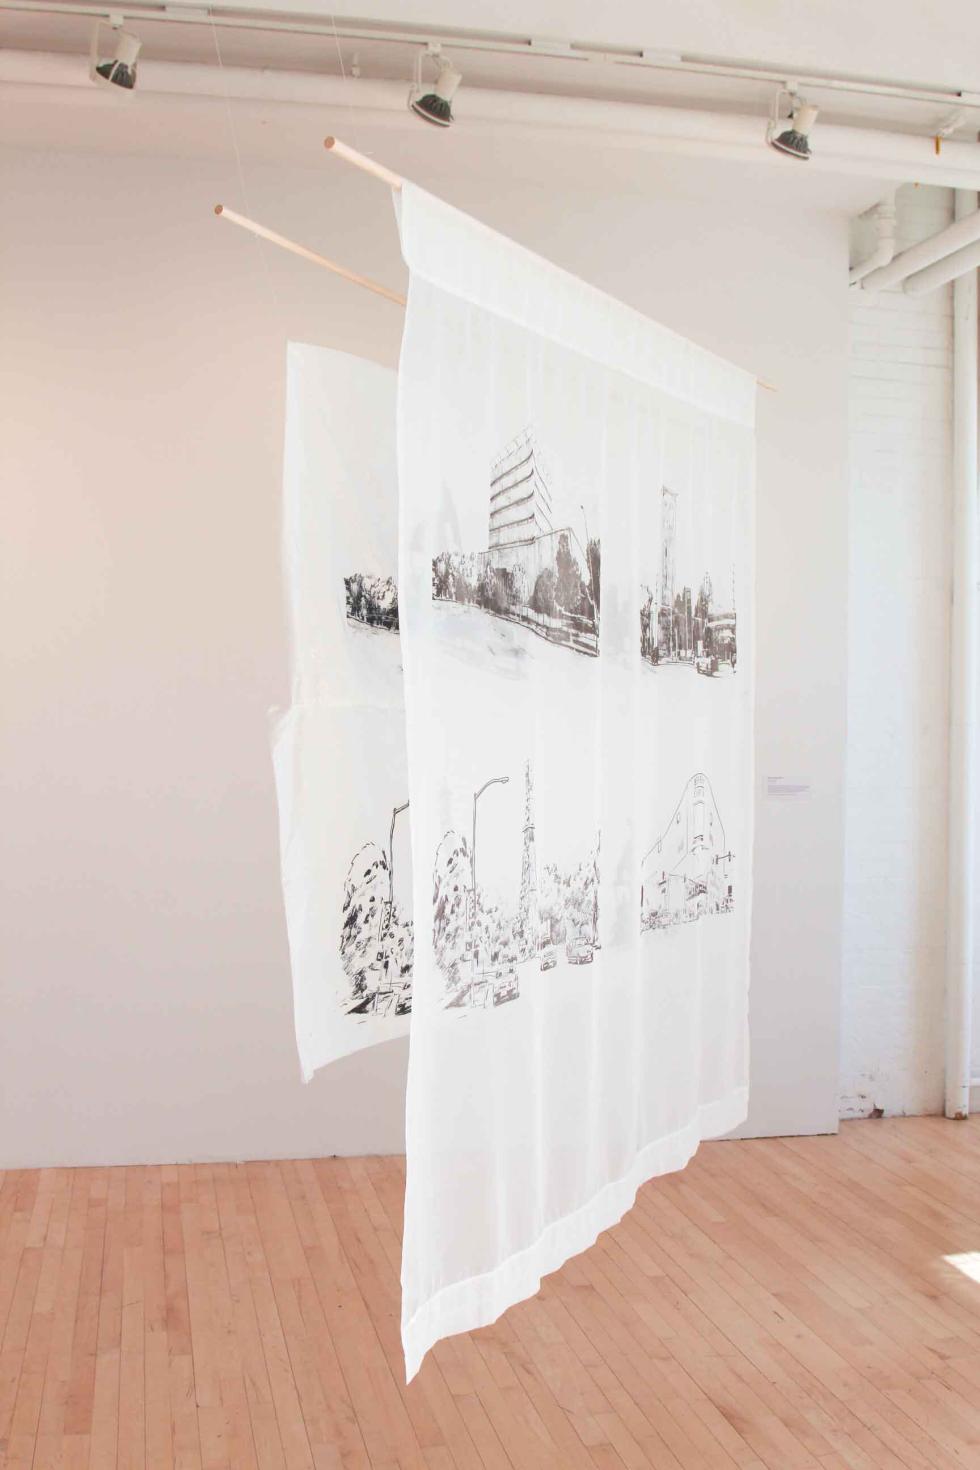 Hanging white banners with four black prints on each banner in a white room.